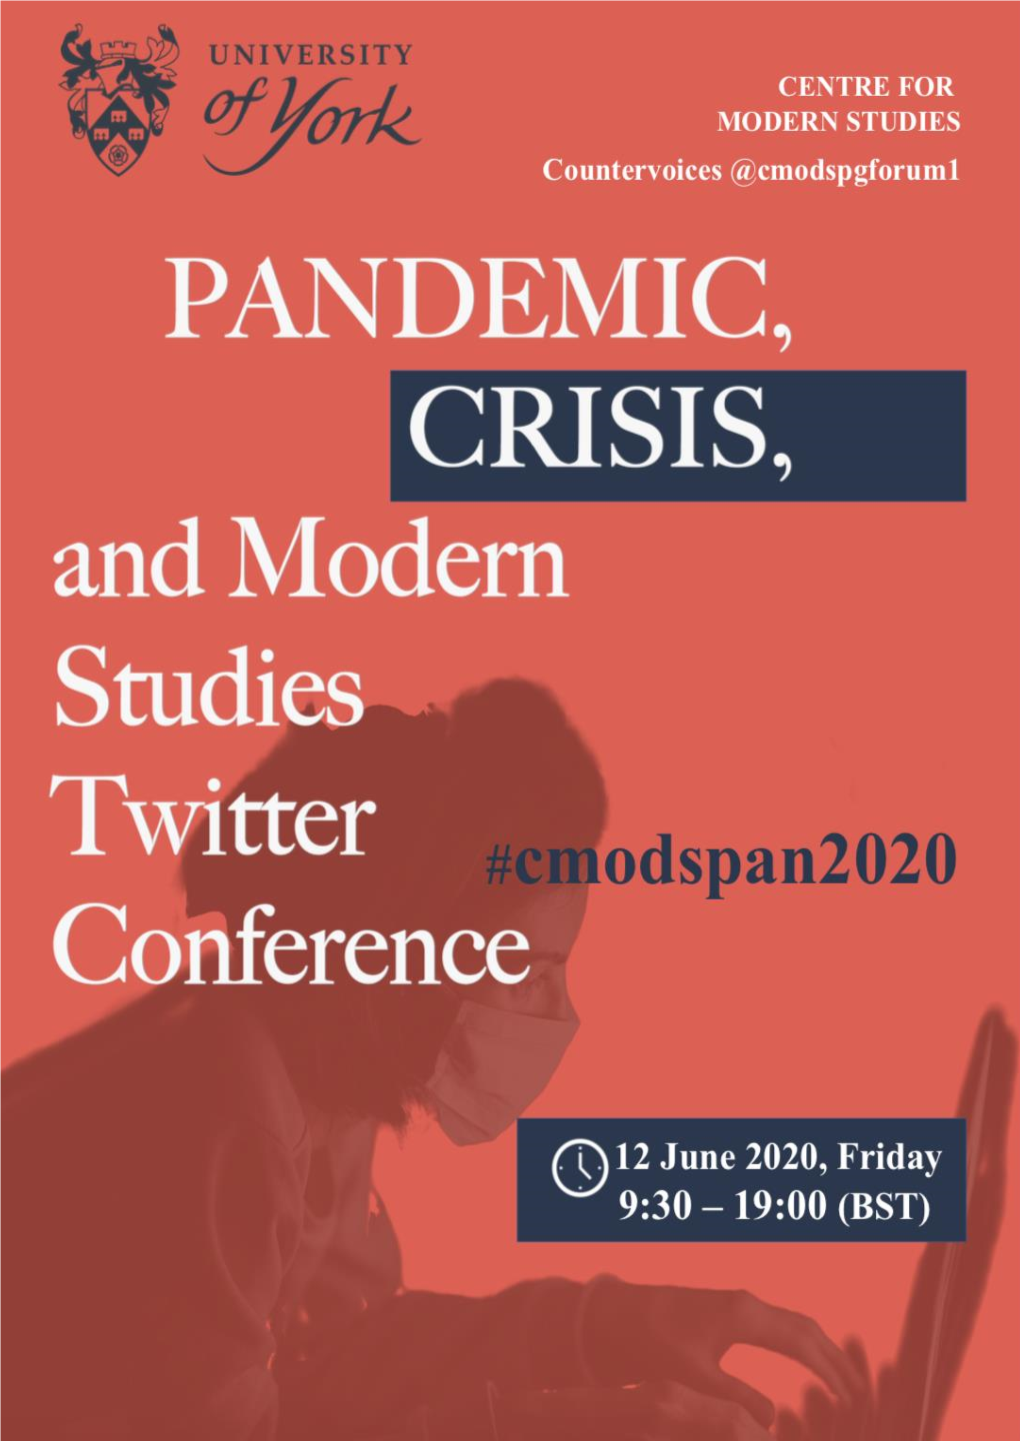 Pandemic, Crisis, and Modern Studies Twitter Conference (#Cmodspan2020) Countervoices Centre for Modern Studies June 12Th, 2020 All Times Are in British Summer Time